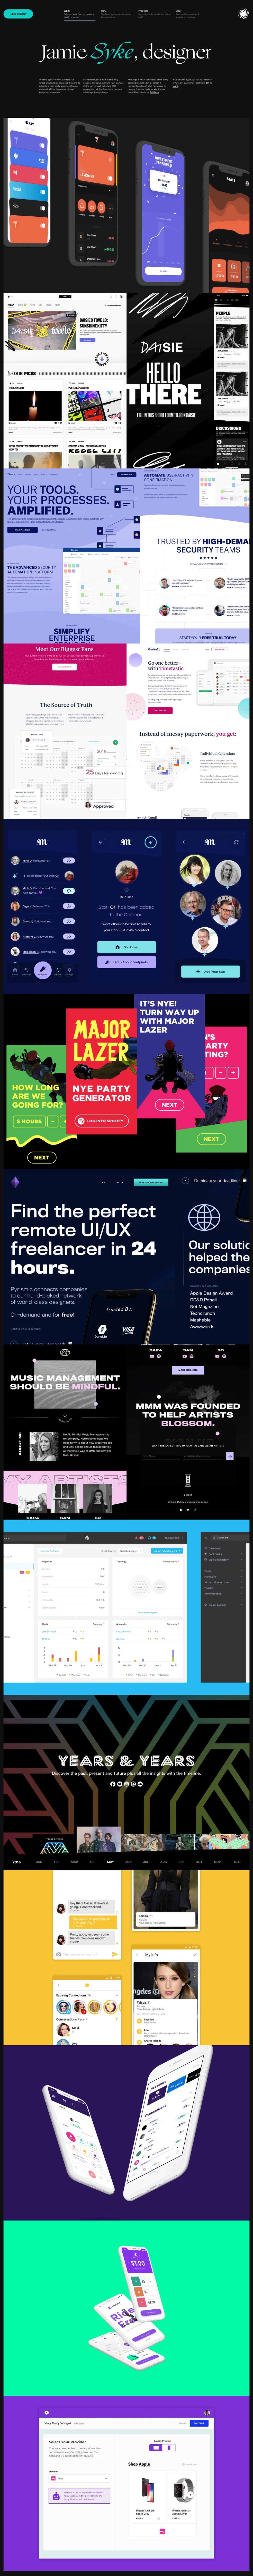 Jamie Syke Landing Page Example: For over a decade I've helped amazing brands around the world to outperform their goals, acquire millions of users and billions in revenue, through design and experience.